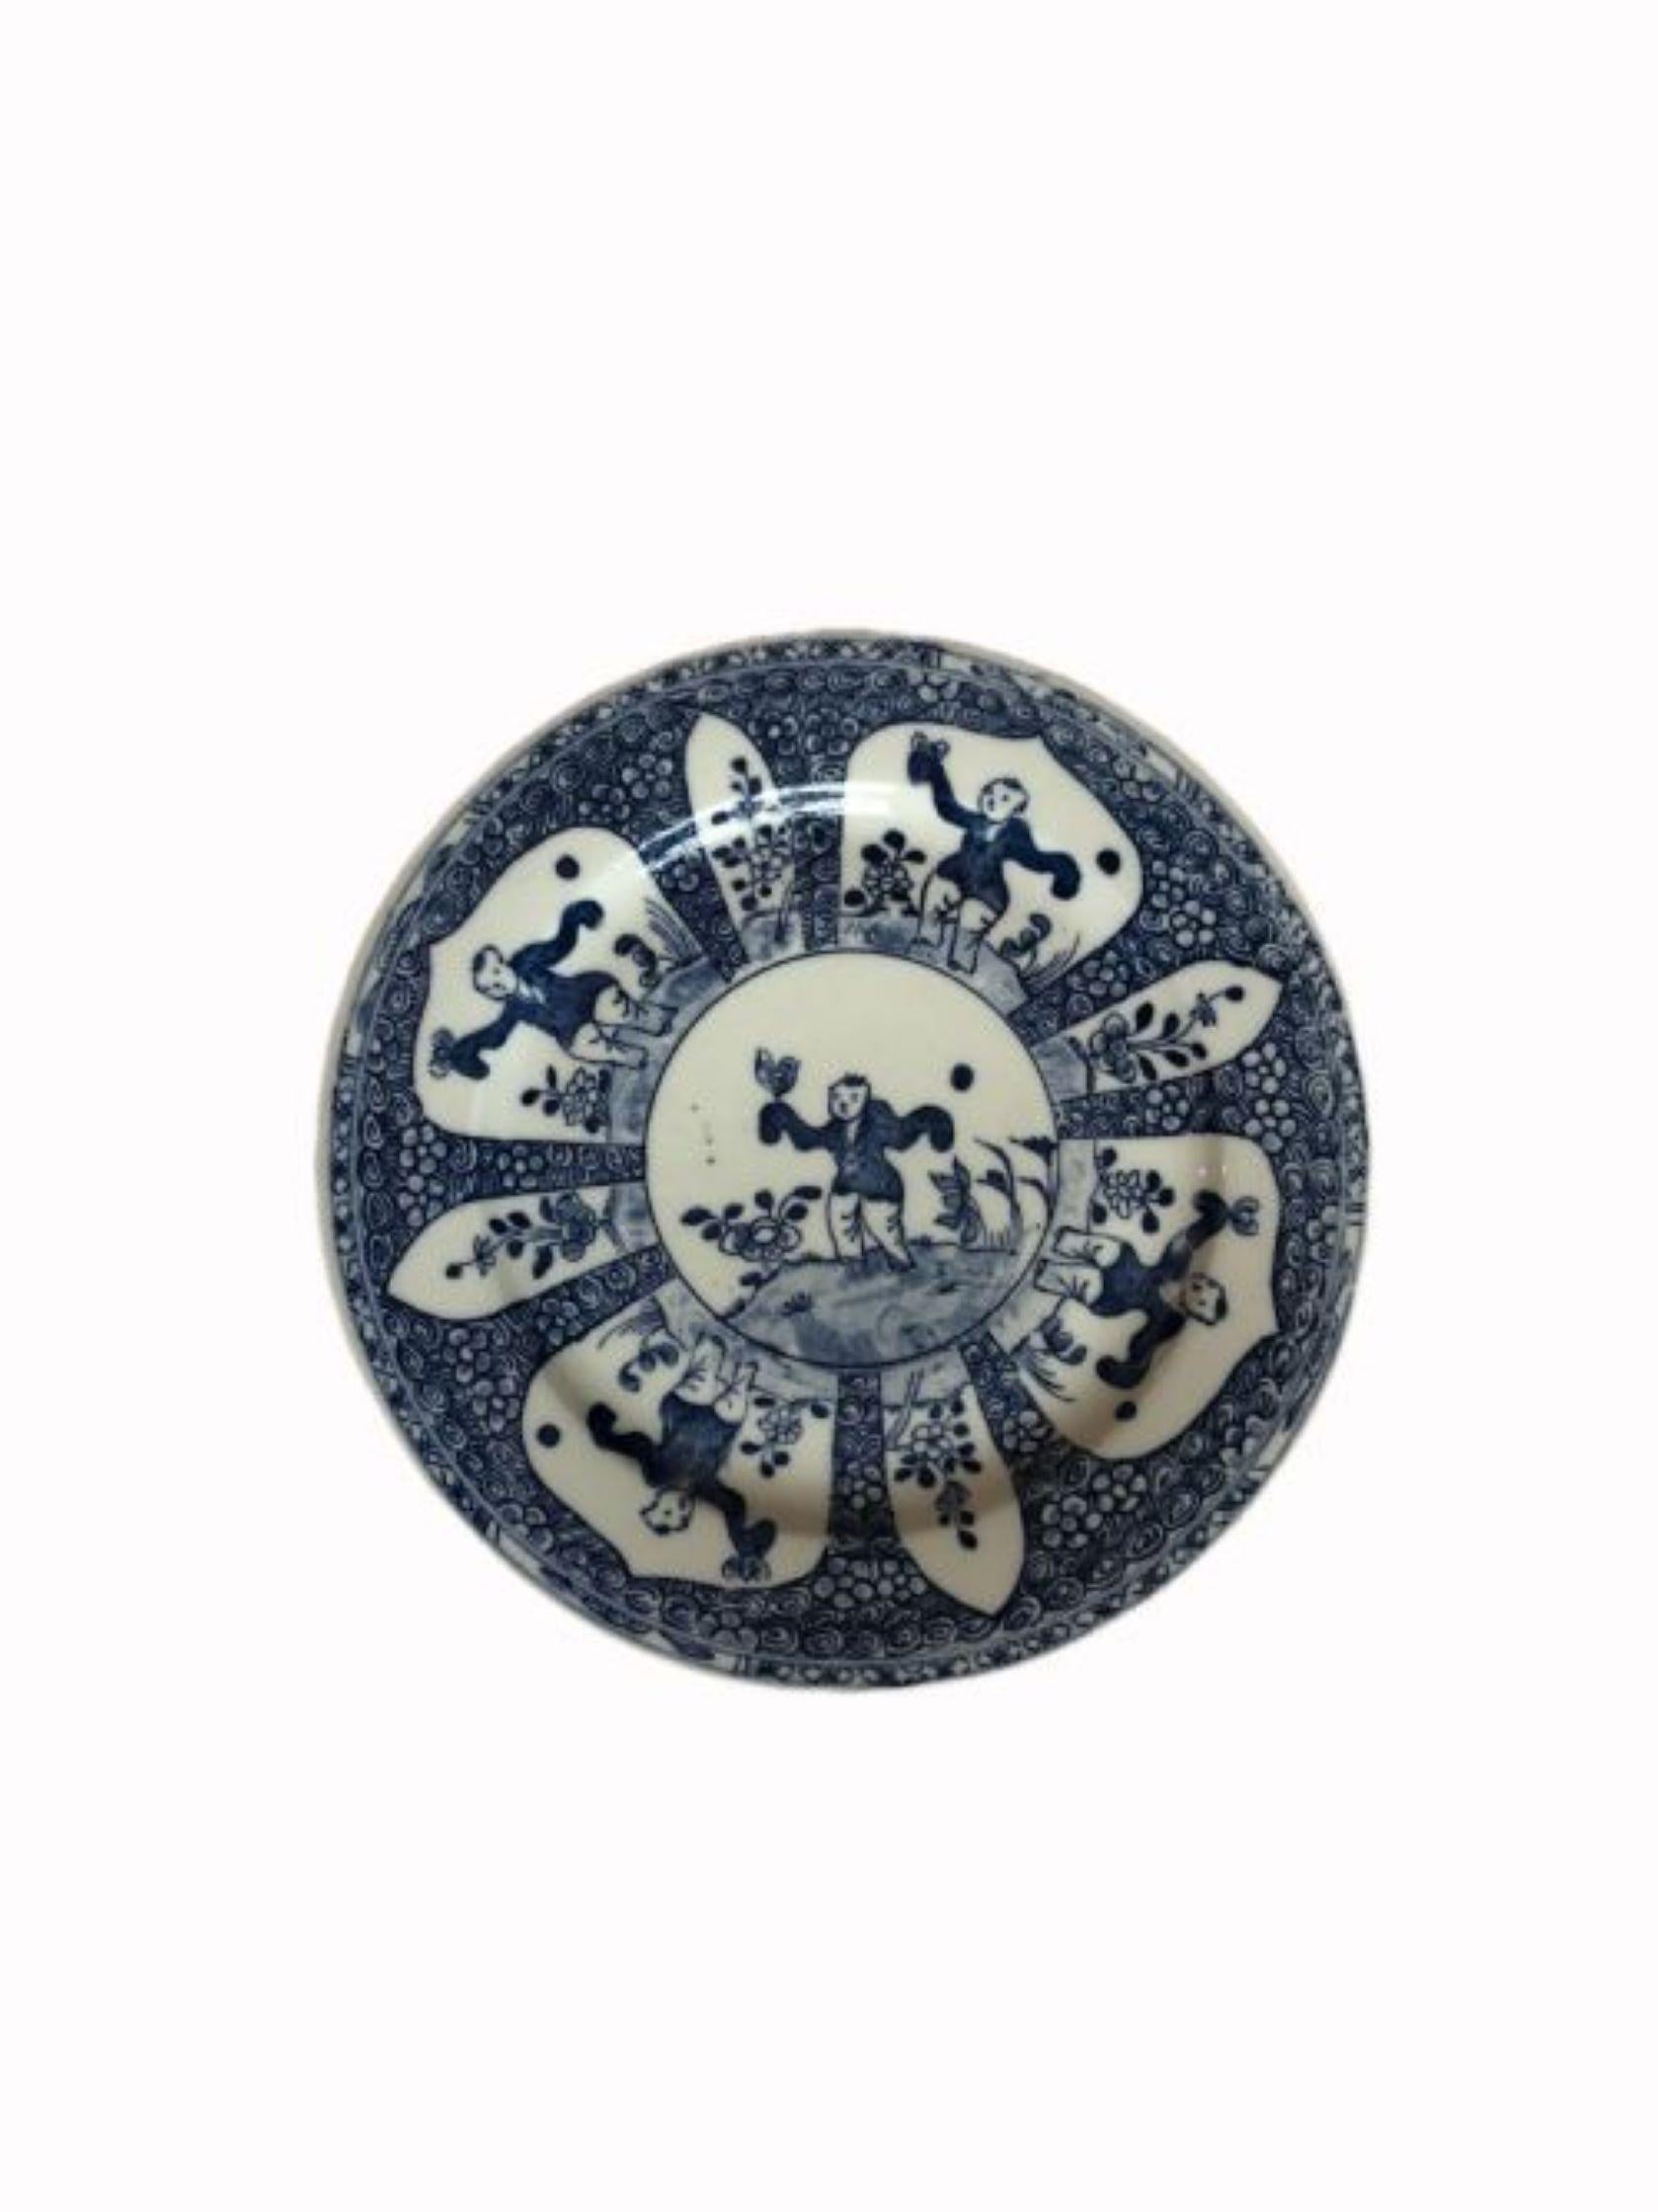 Antique Chinese Blue & White hand painted plate having lovely hand painted panels of a Chinese man holding a bird in a garden with flowers & leaves.